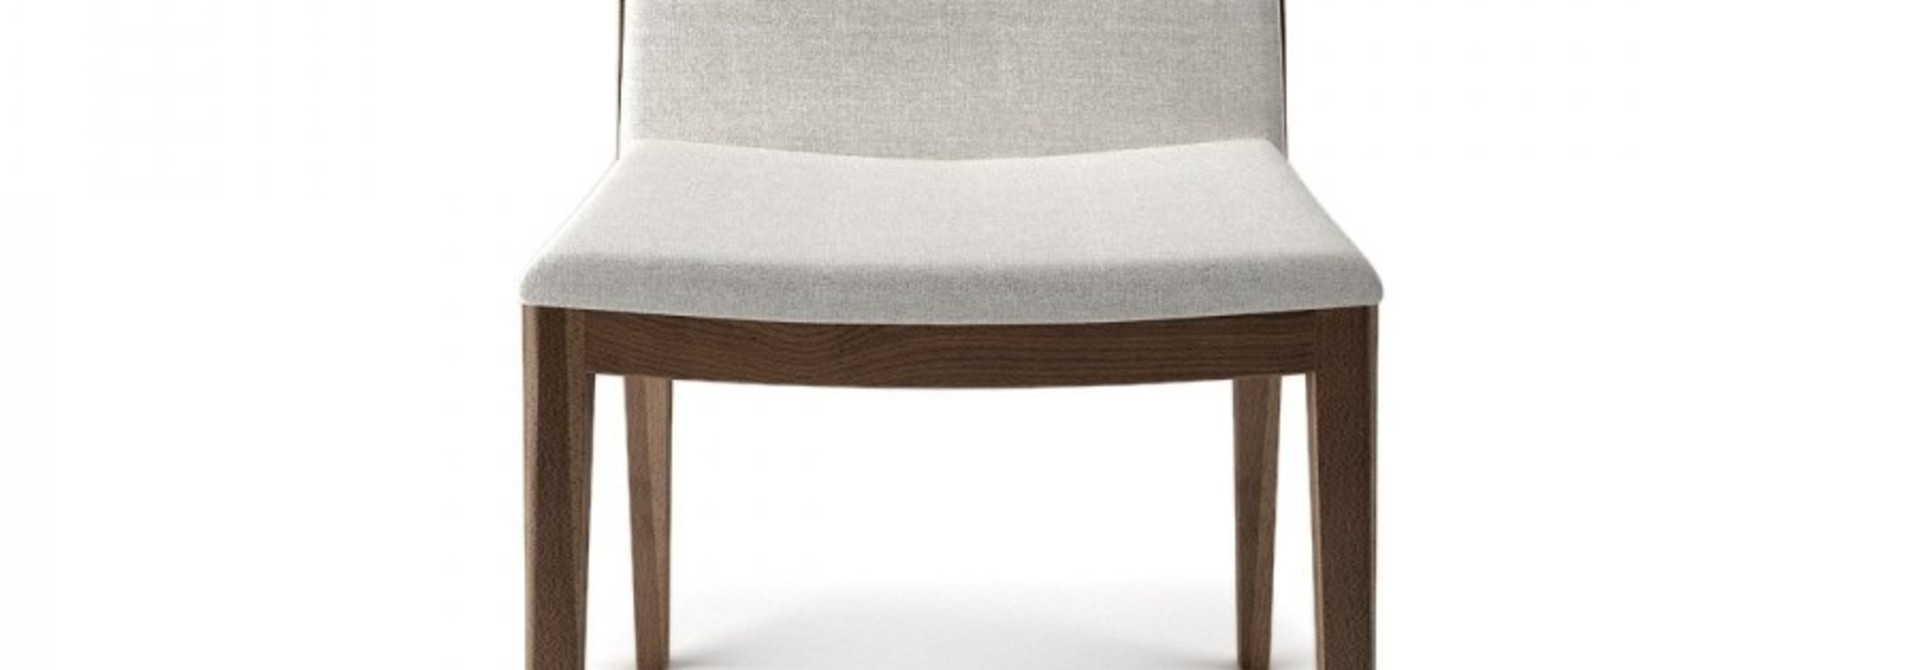 Moment Dining Chair